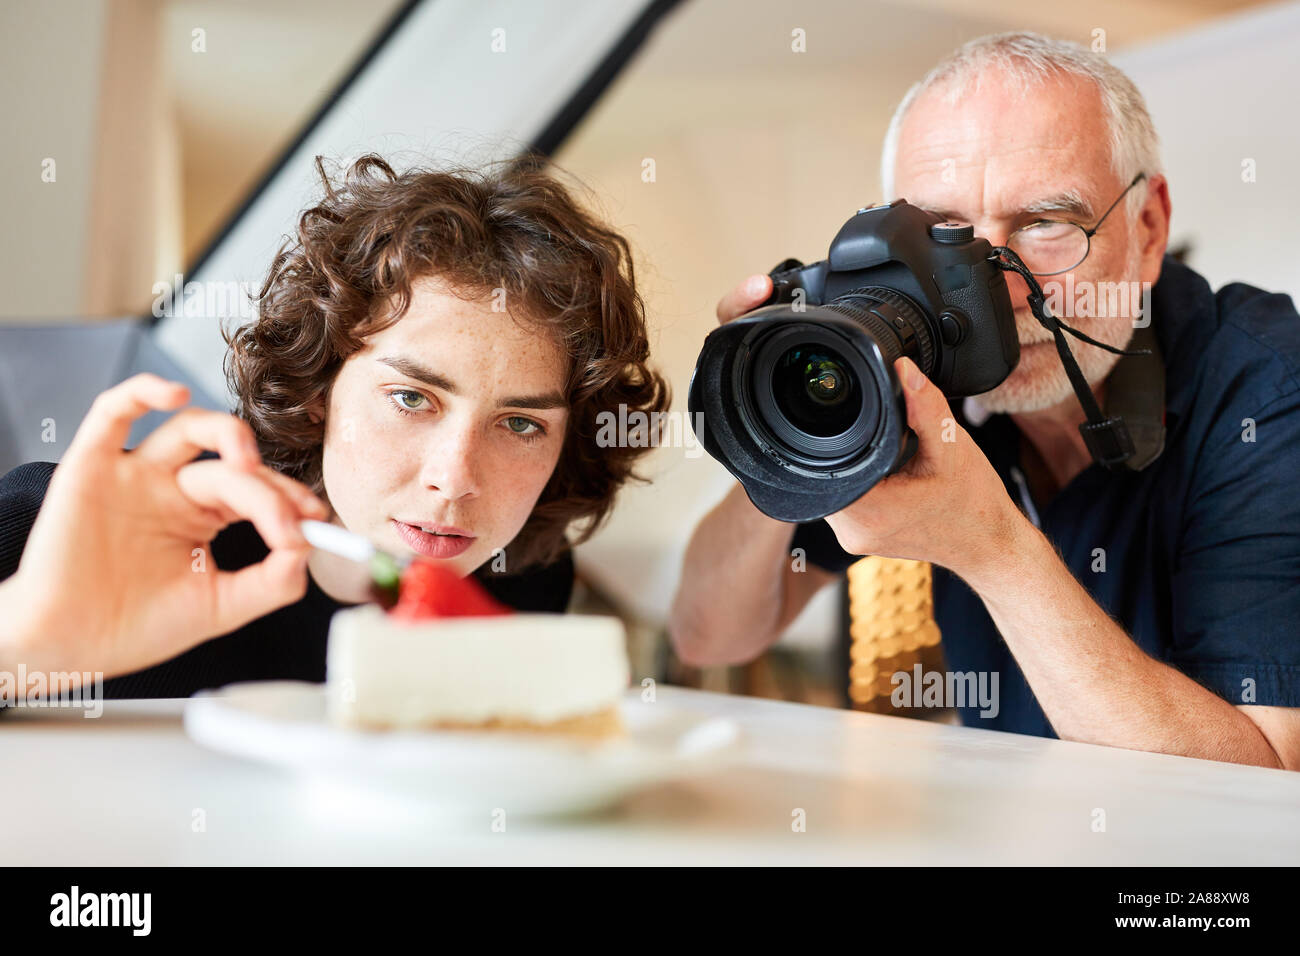 Professional food photographer and assistant in food styling Stock Photo